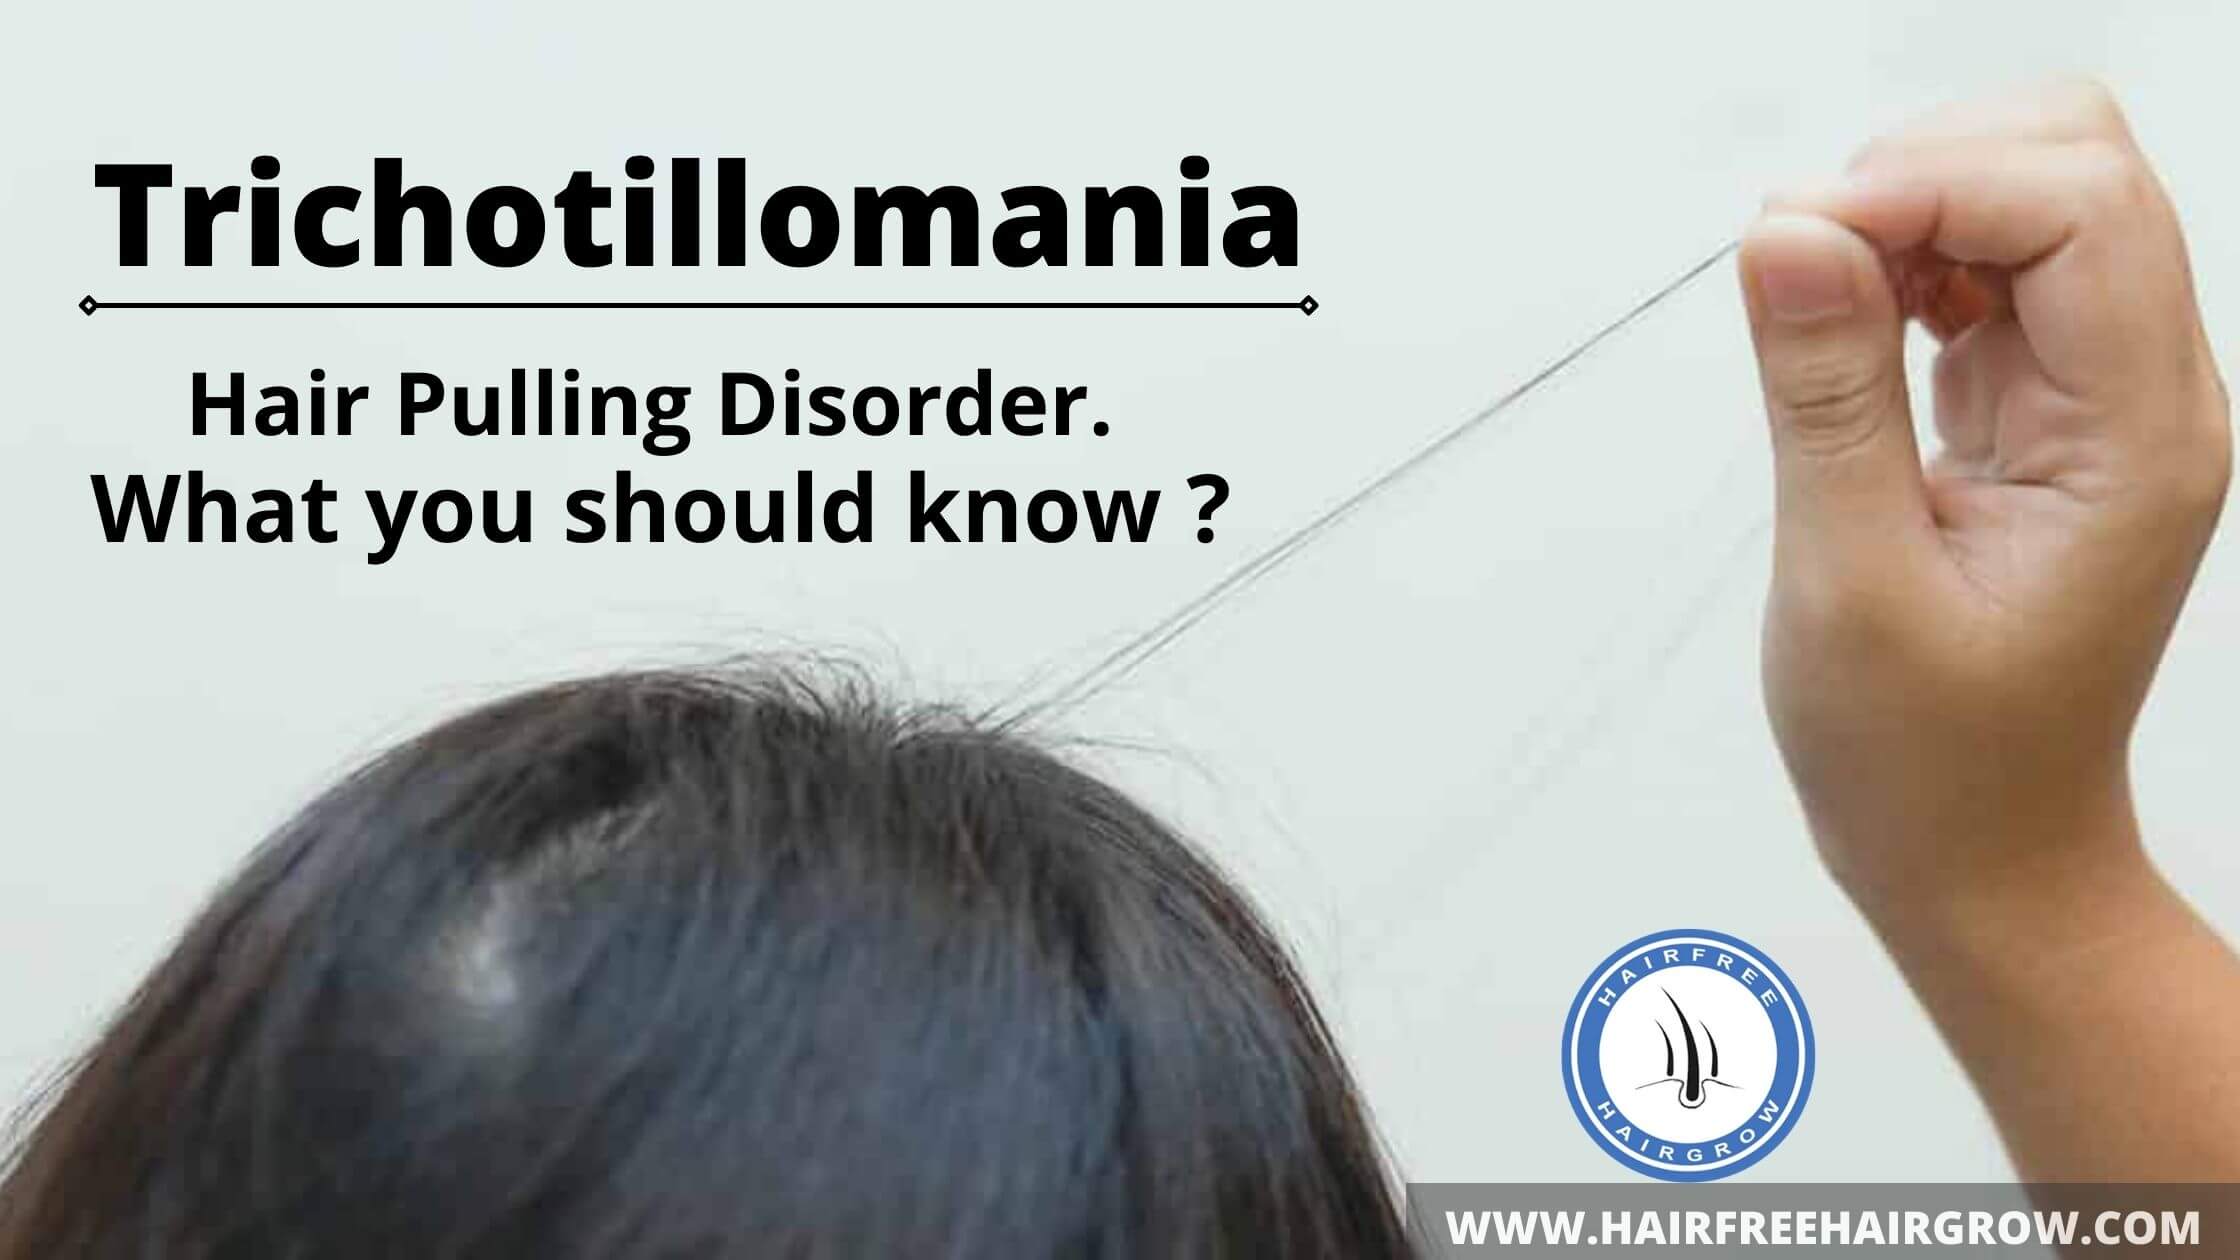 a person pulling her hair as she is suffering from trichotillomania - a hair pulling disorder